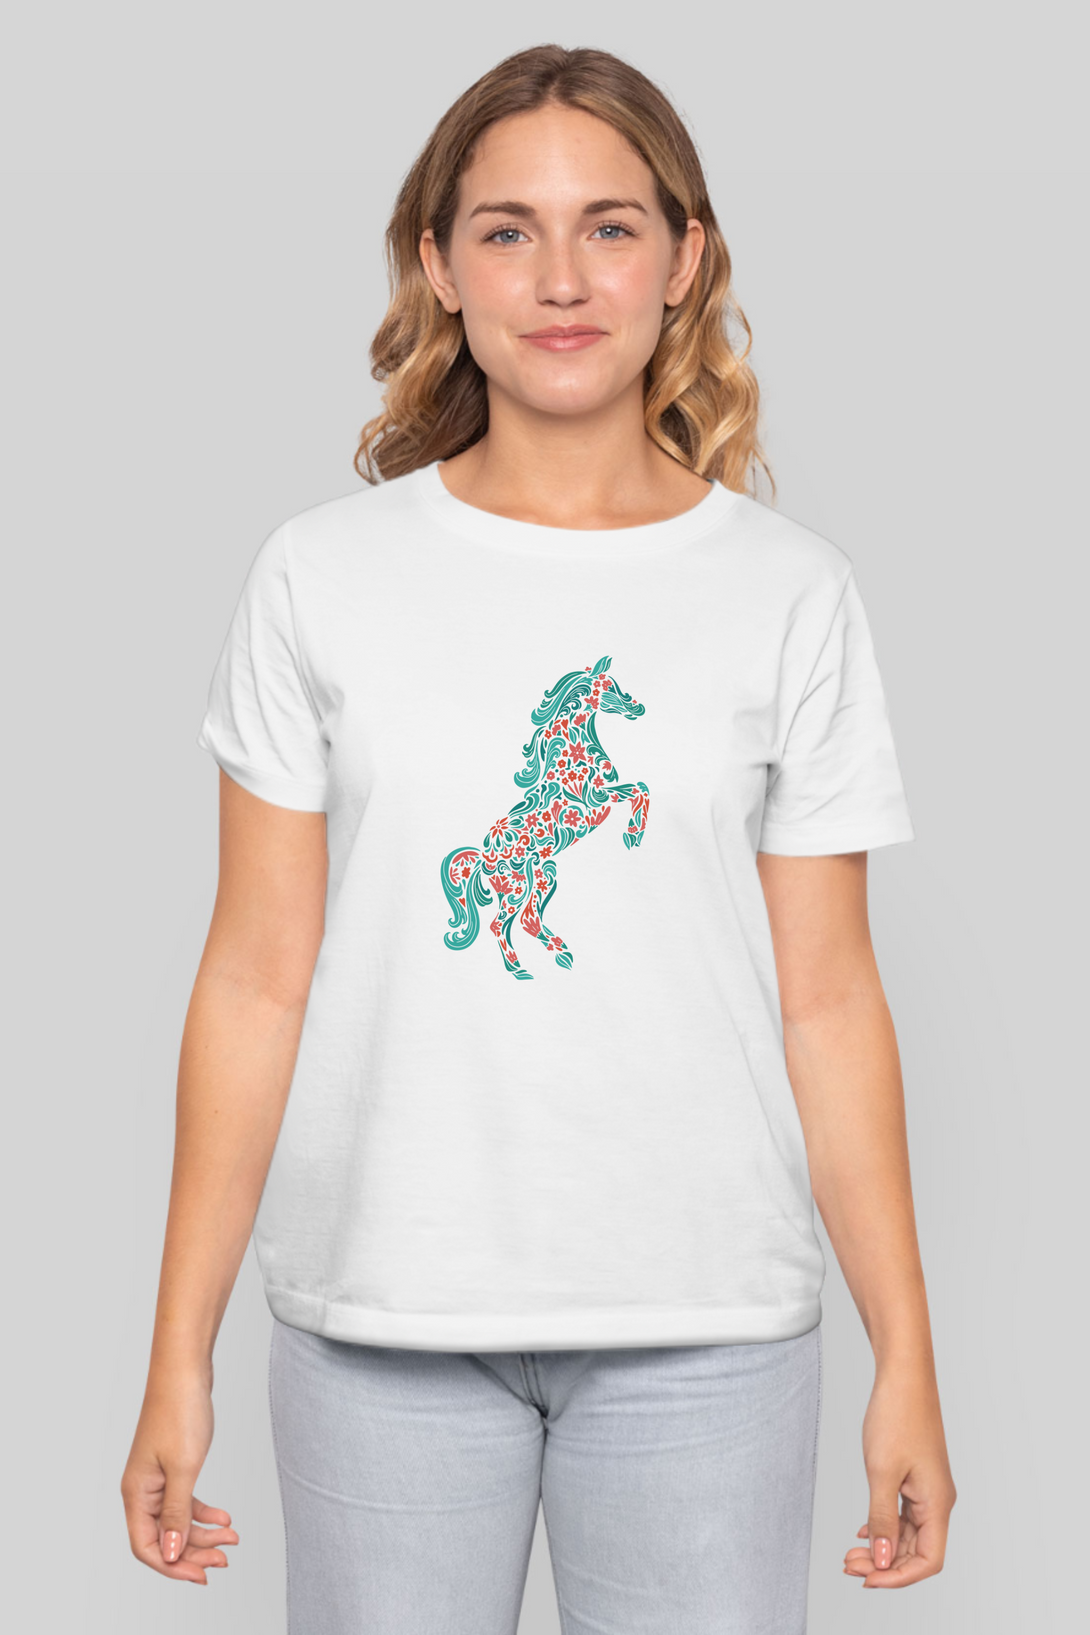 Floral Horse Printed T-Shirt For Women - WowWaves - 9